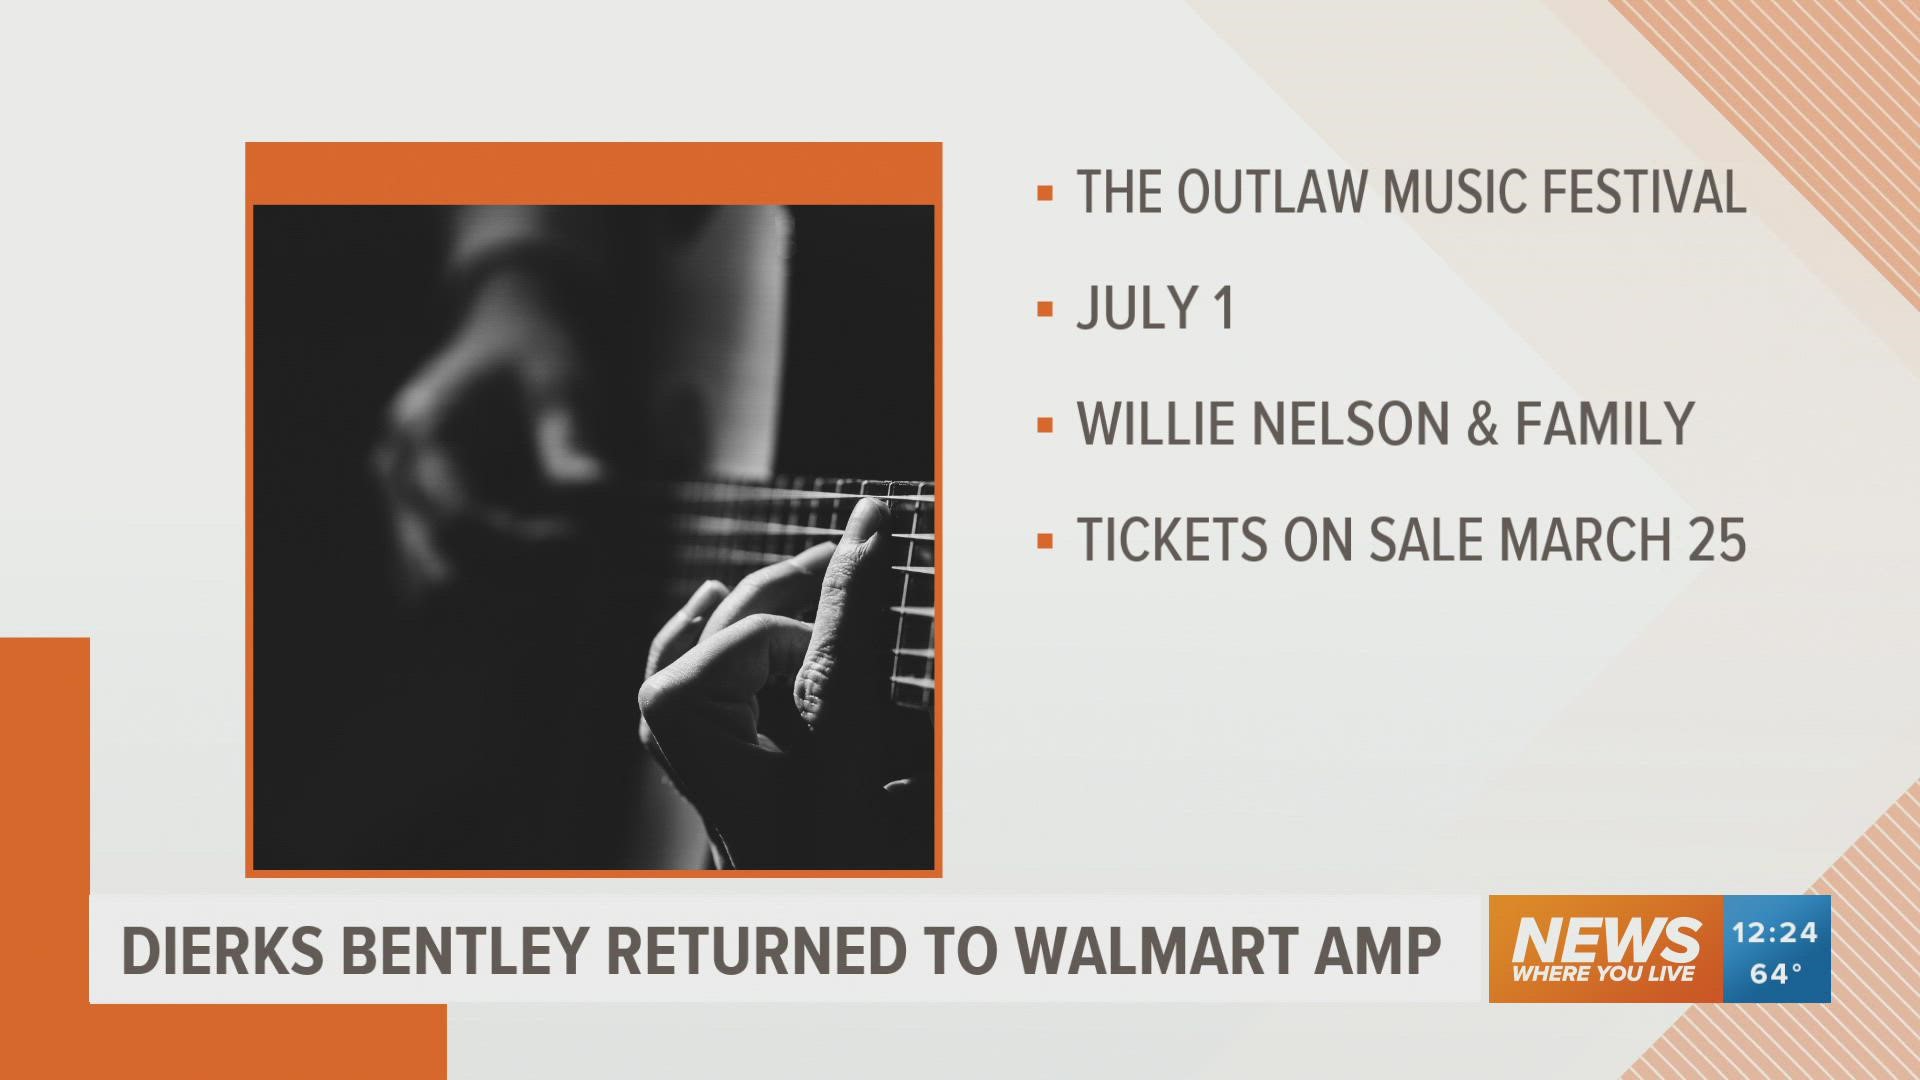 Willie Nelson & Family, Brothers Osborne, Steve Earle & The Dukes, and Allison Russell will all be performing at the Walmart AMP during the festival this July.